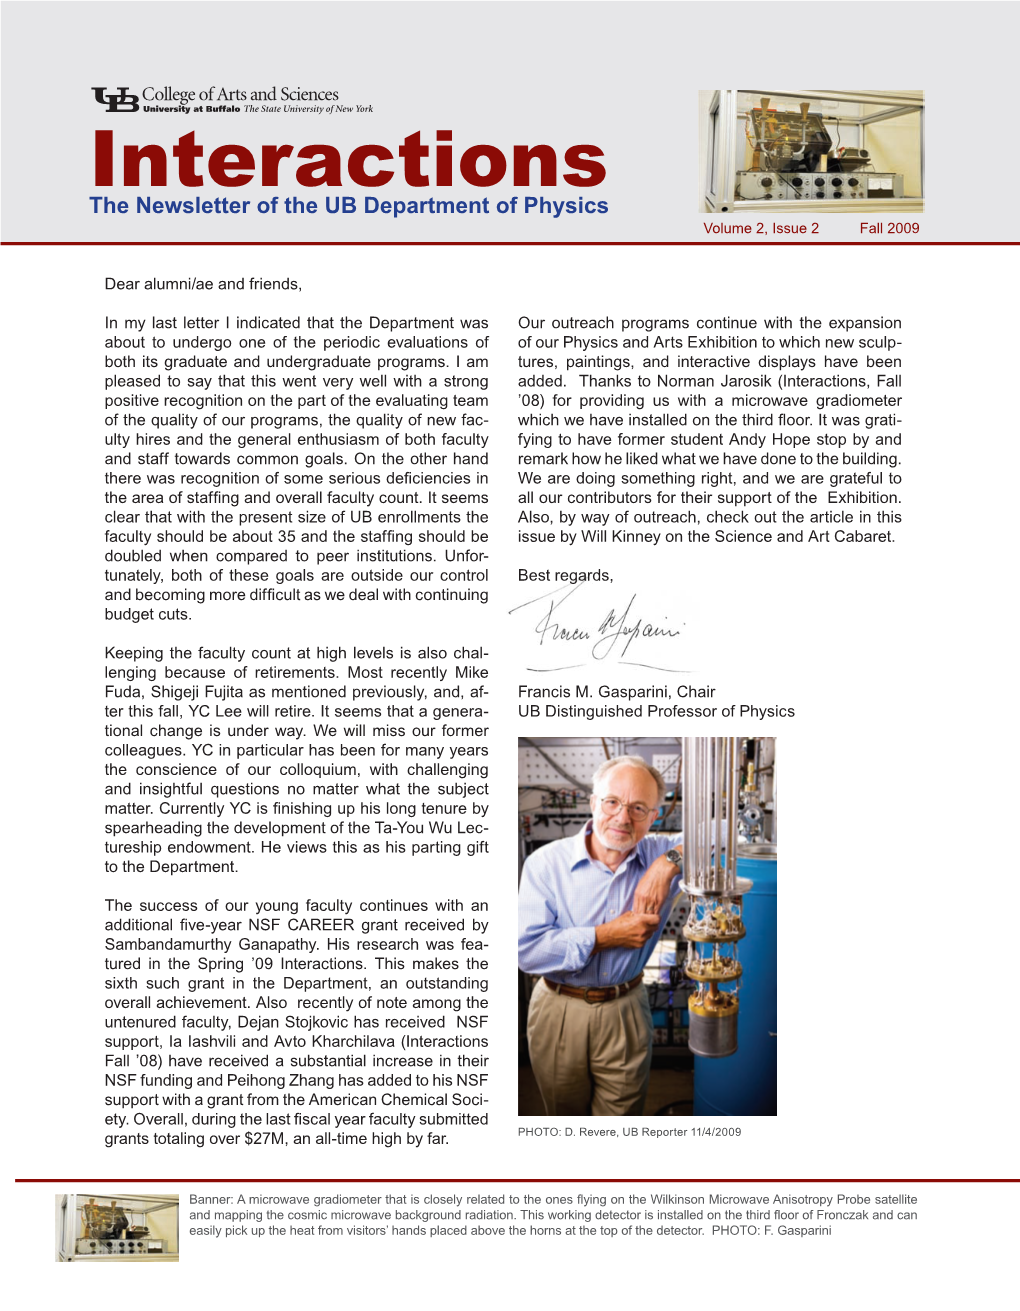 Interactions the Newsletter of the UB Department of Physics Volume 2, Issue 2 Fall 2009